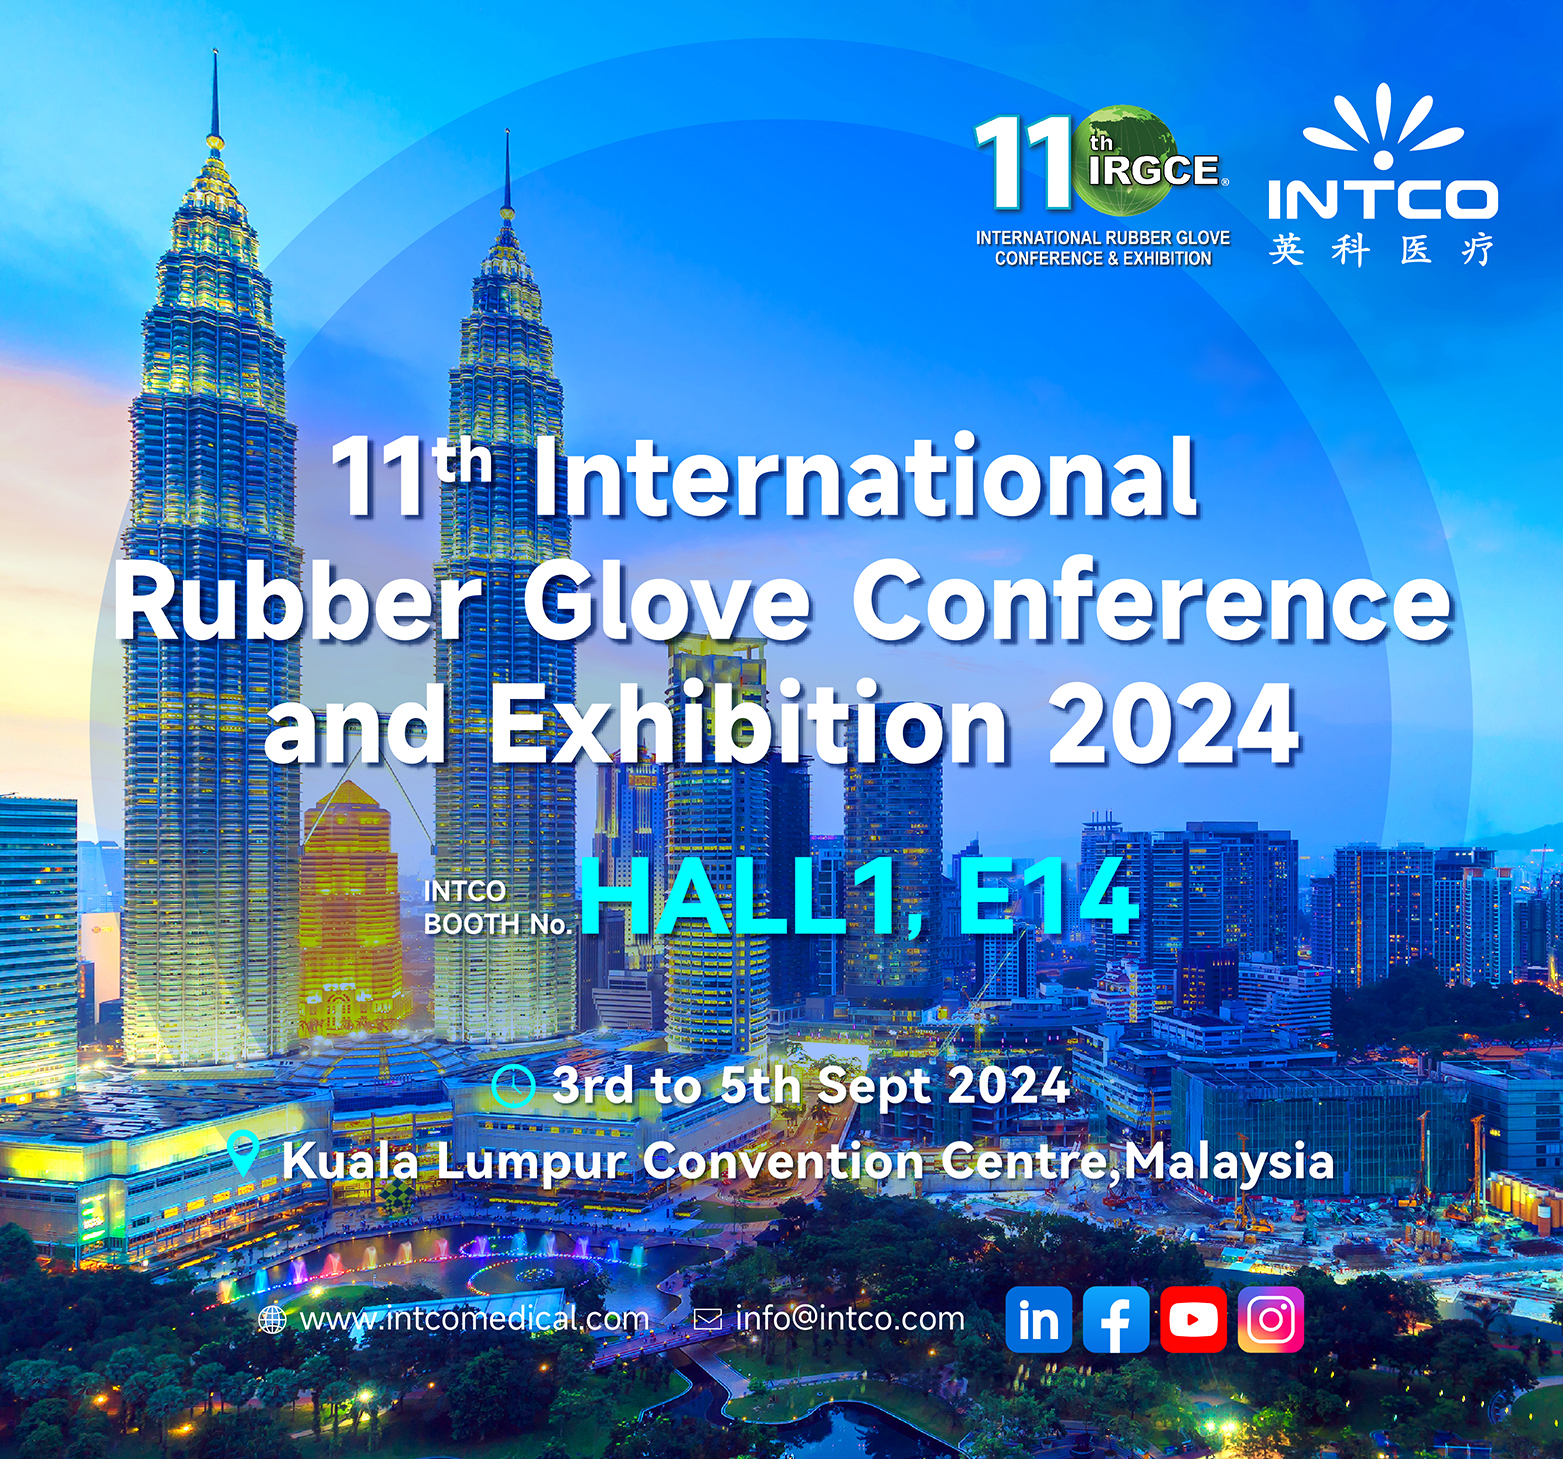 11th International Rubber Glove Conferenceand Exhibition 2024